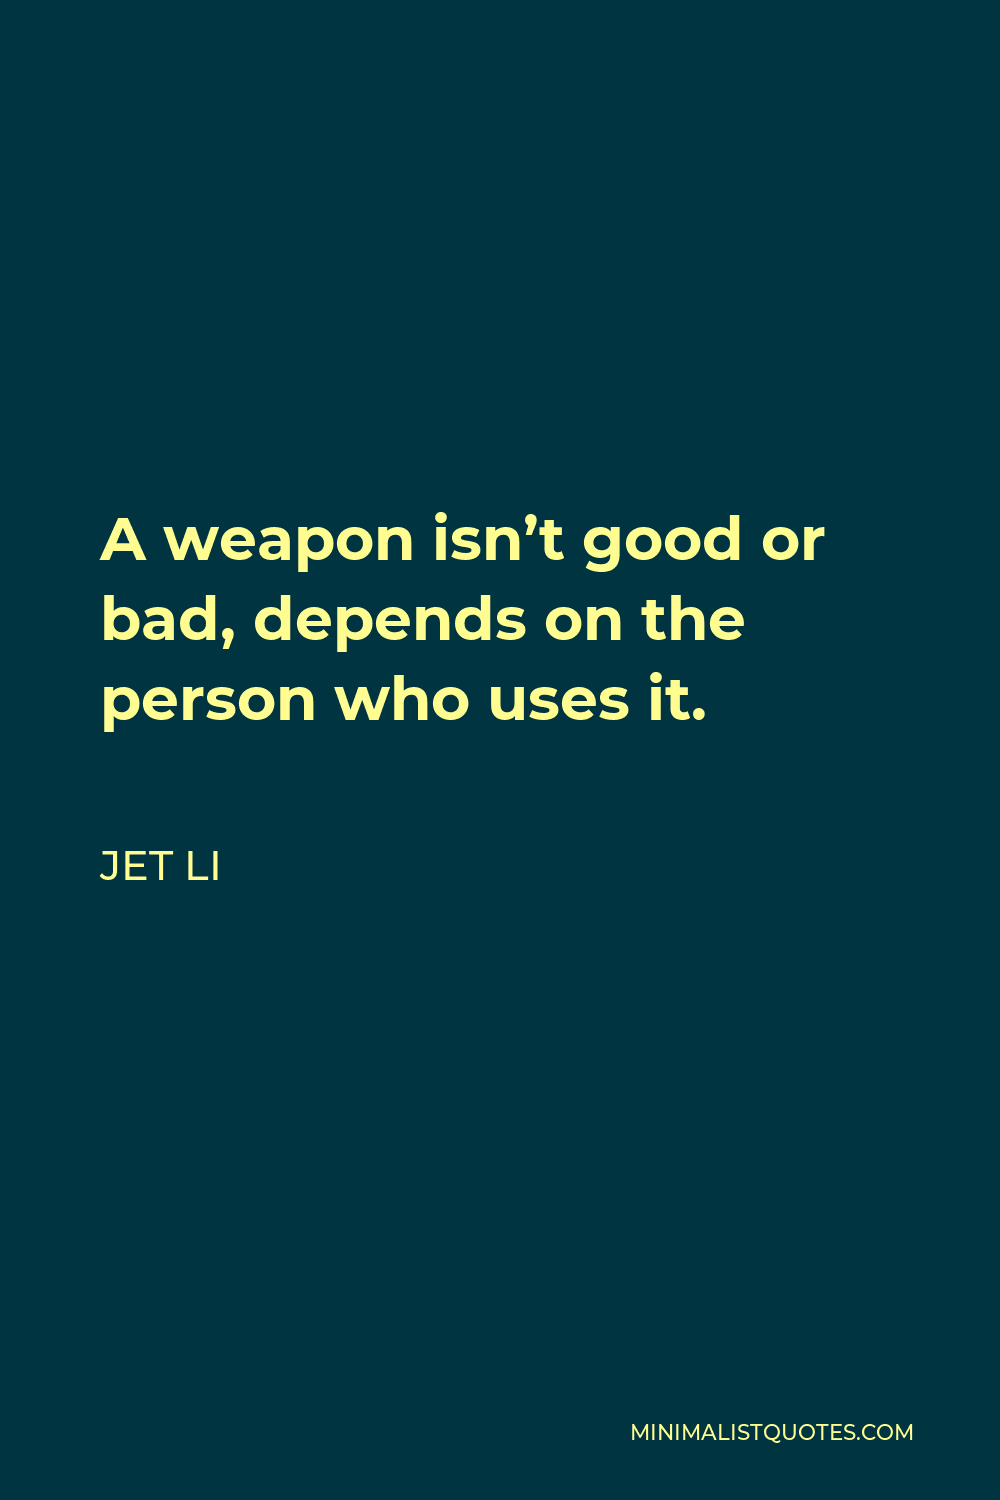 Jet Li Quote - A weapon isn’t good or bad, depends on the person who uses it.